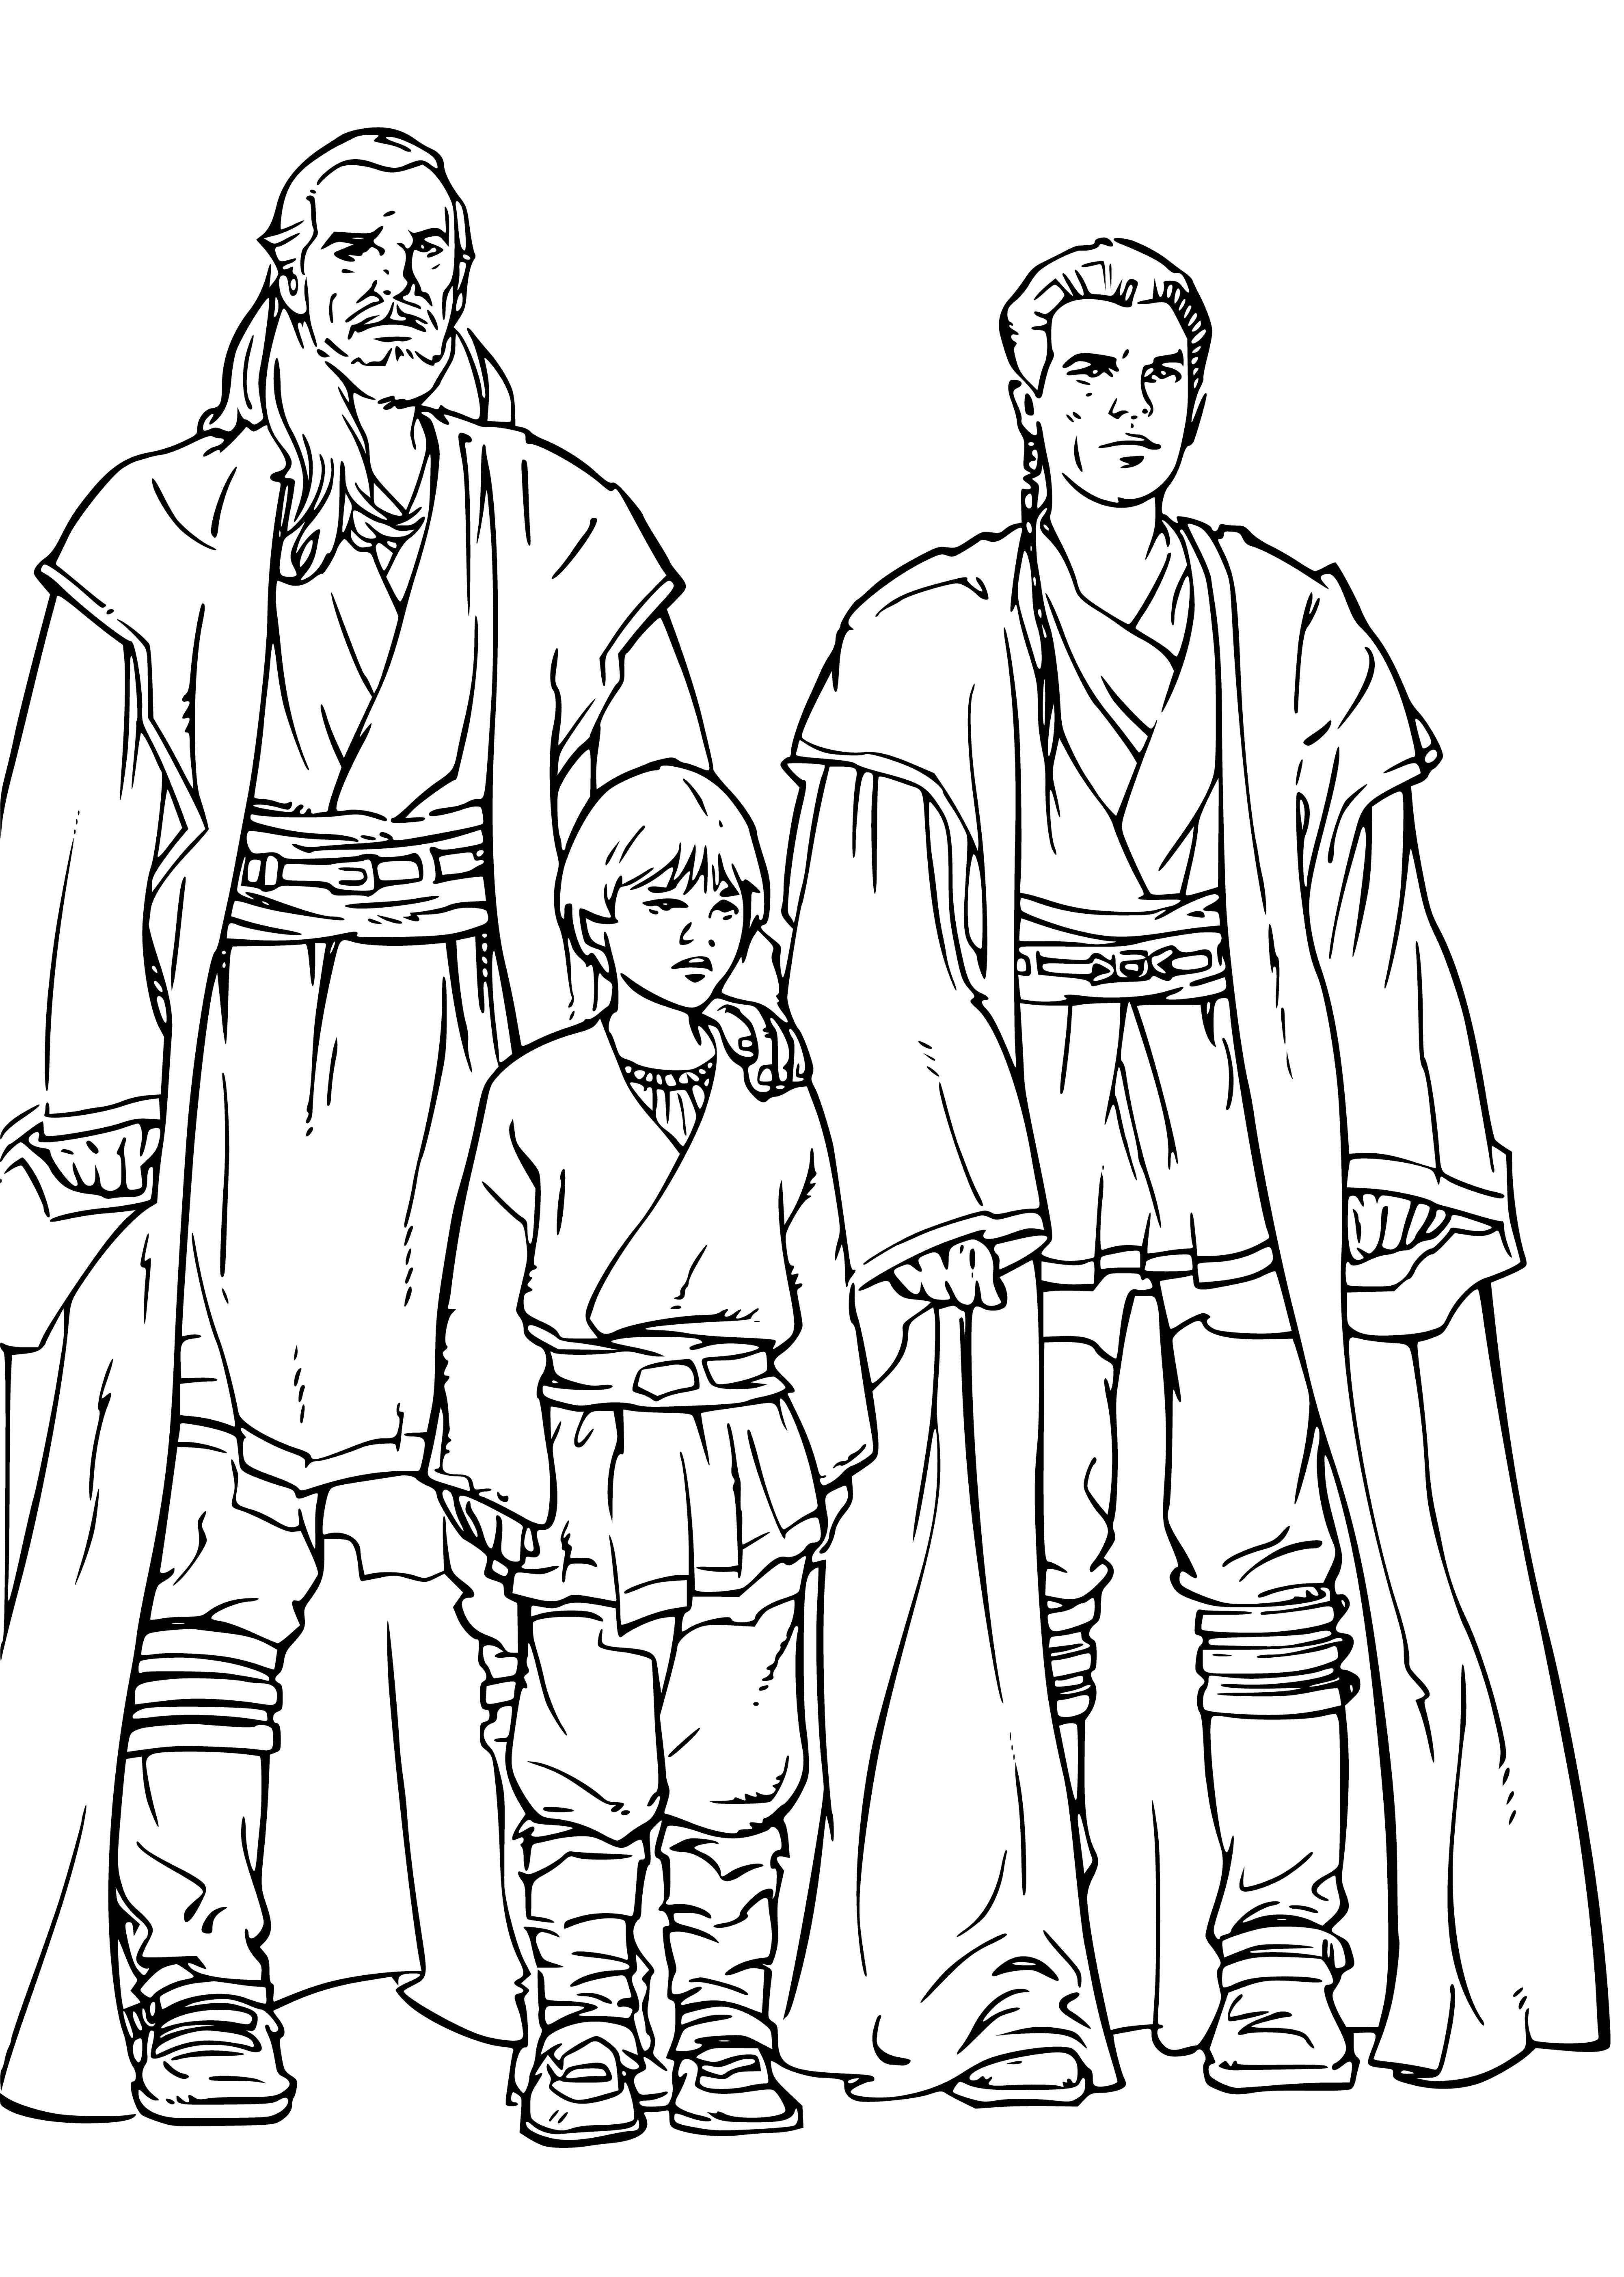 coloring page: Two figures look out from a ship overlooking two fighters in a desert planet. The man is in Jedi robes and the boy is small. #StarWars #Space